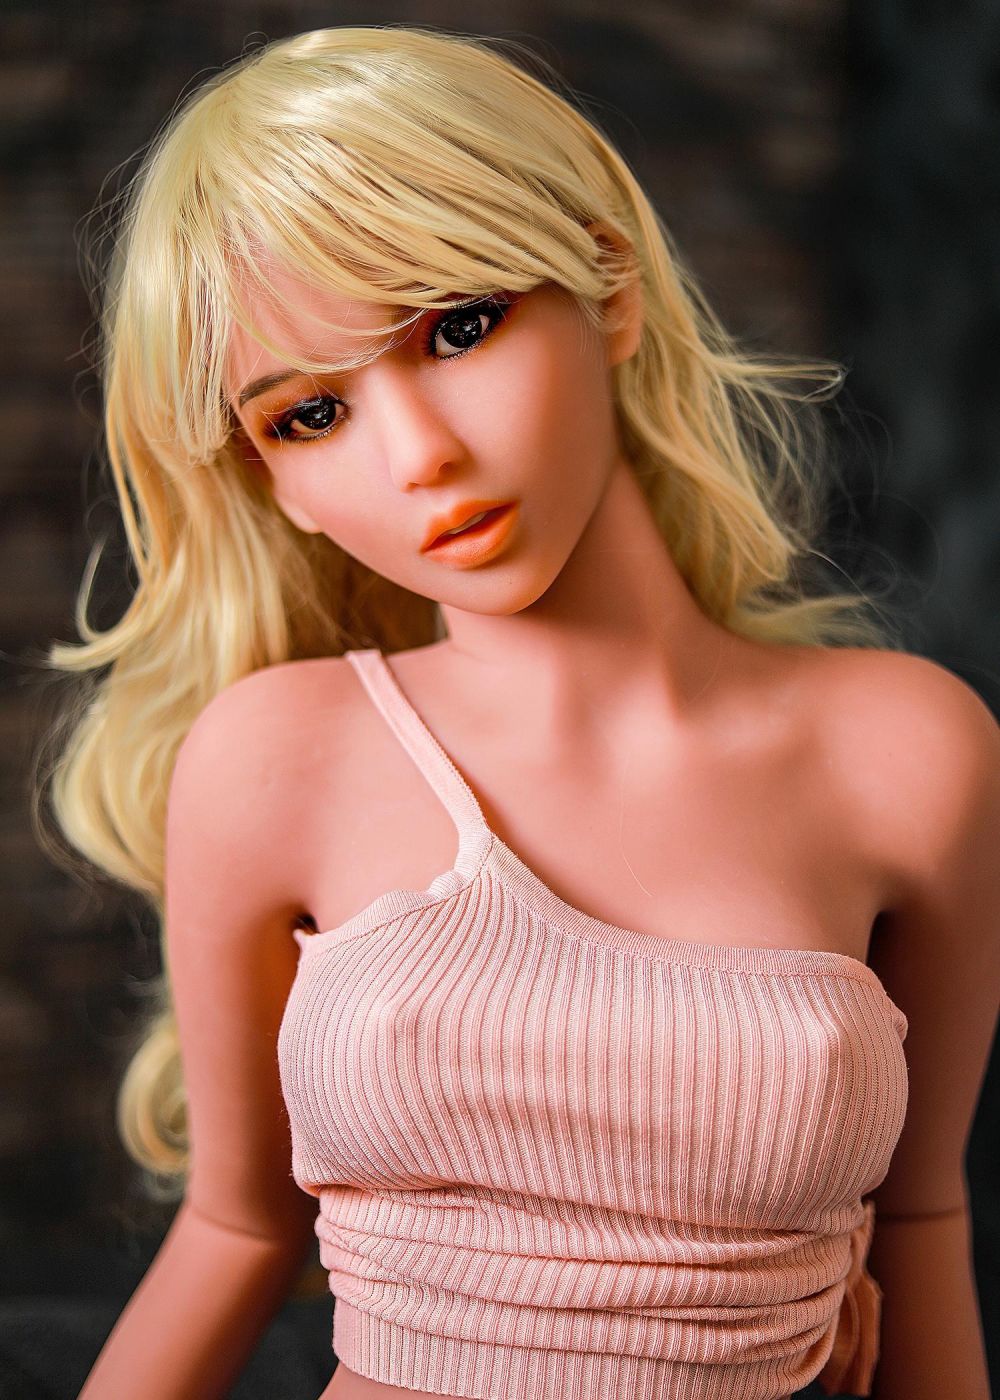 61.8IN 61.7LB Sex Doll White Skin With Long Blonde Curly Hair